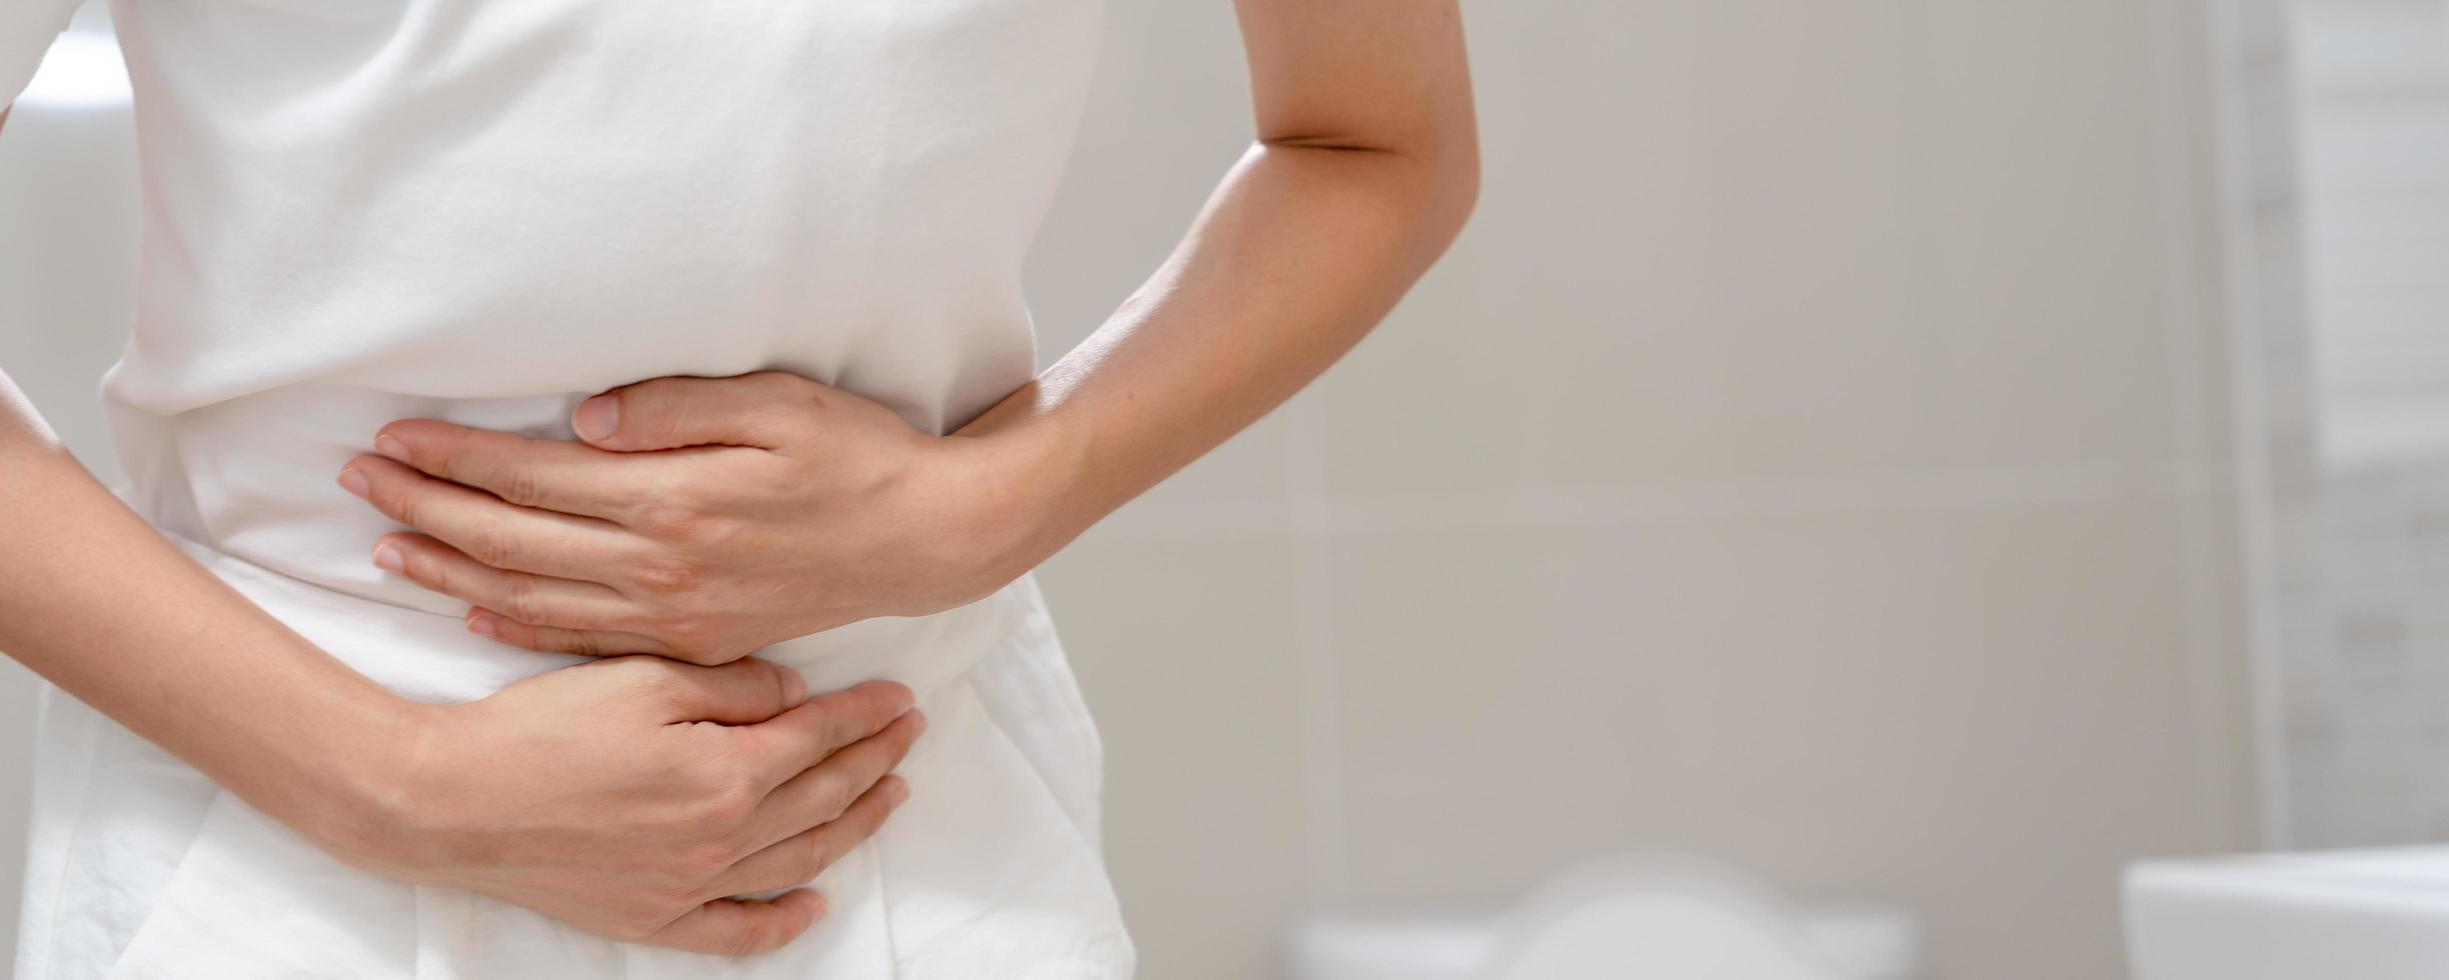 Constipation and diarrhea in bathroom. Hurt woman touch belly  stomach ache painful. colon inflammation problem, toxic food, abdominal pain, abdomen, constipated in toilet, stomachache, Hygiene photo